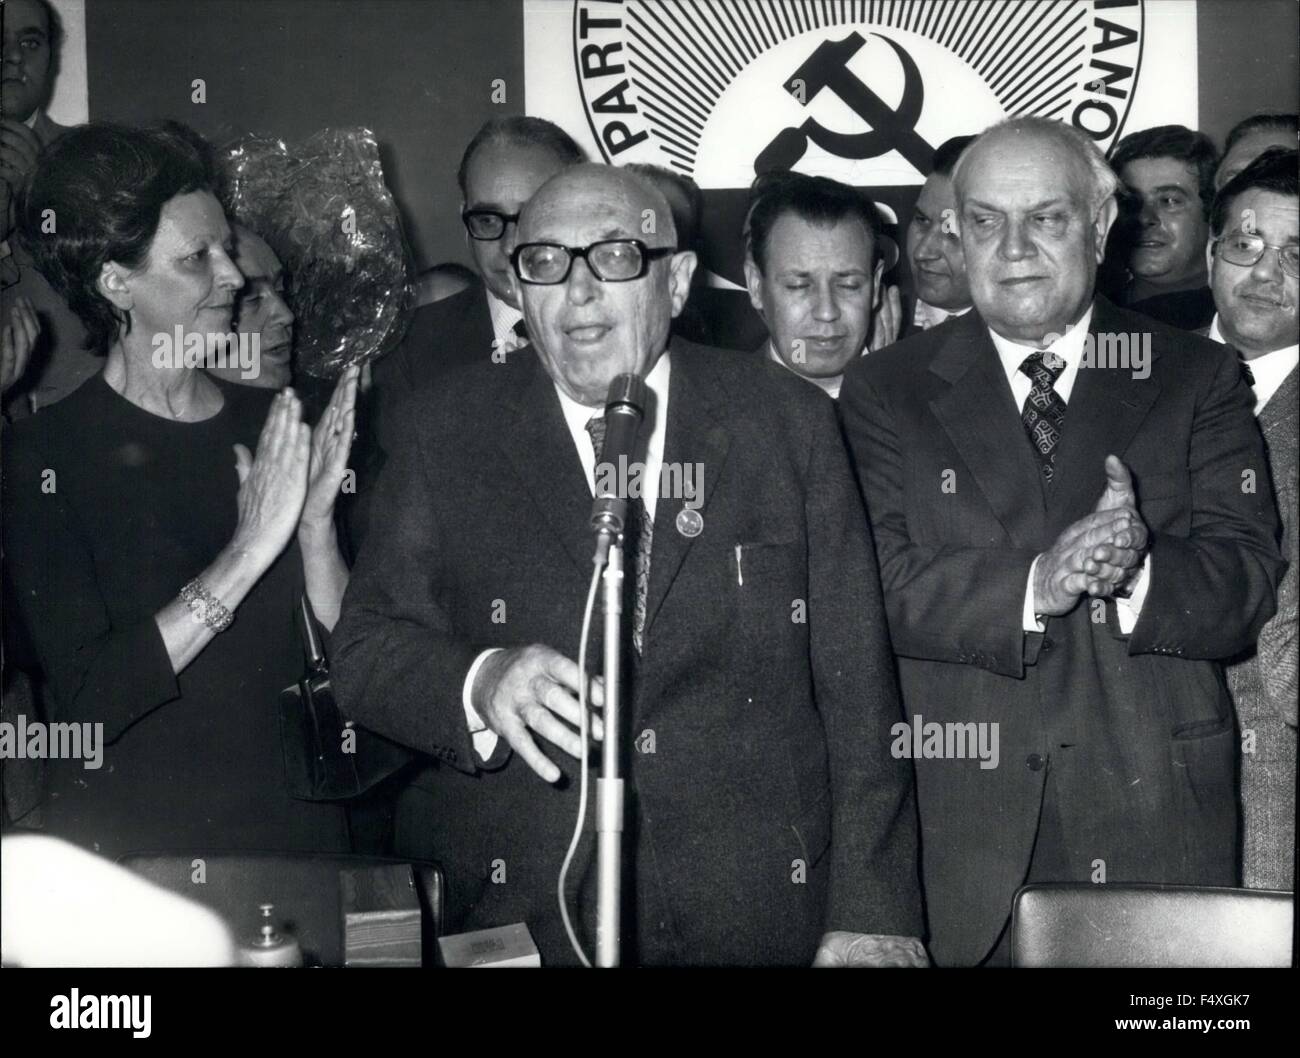 1968 - Pietro Nenni, the old leader of the Italian Socialism, has eighty years and the Direction of the PSI (Italian Socialist Party) celebrated him. Photo shows Pietro Nenni, center) feasted by Vice Prime Minister Francesco De Hartino (right) and by Luciana Nenni, daughter of the leader. © Keystone Pictures USA/ZUMAPRESS.com/Alamy Live News Stock Photo